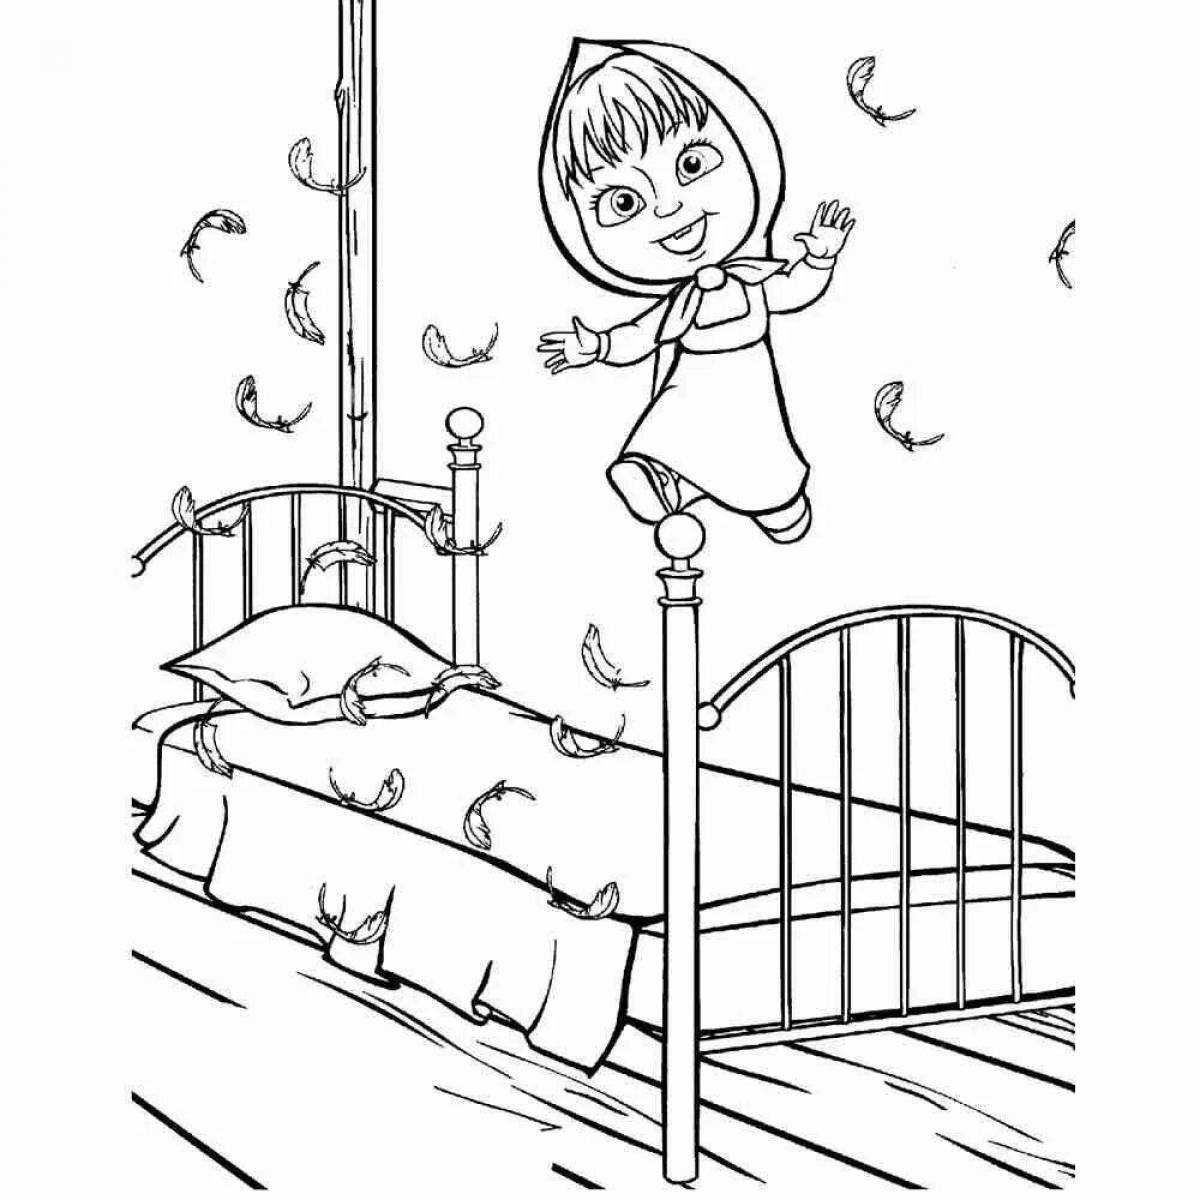 Coloring page graceful masha doll